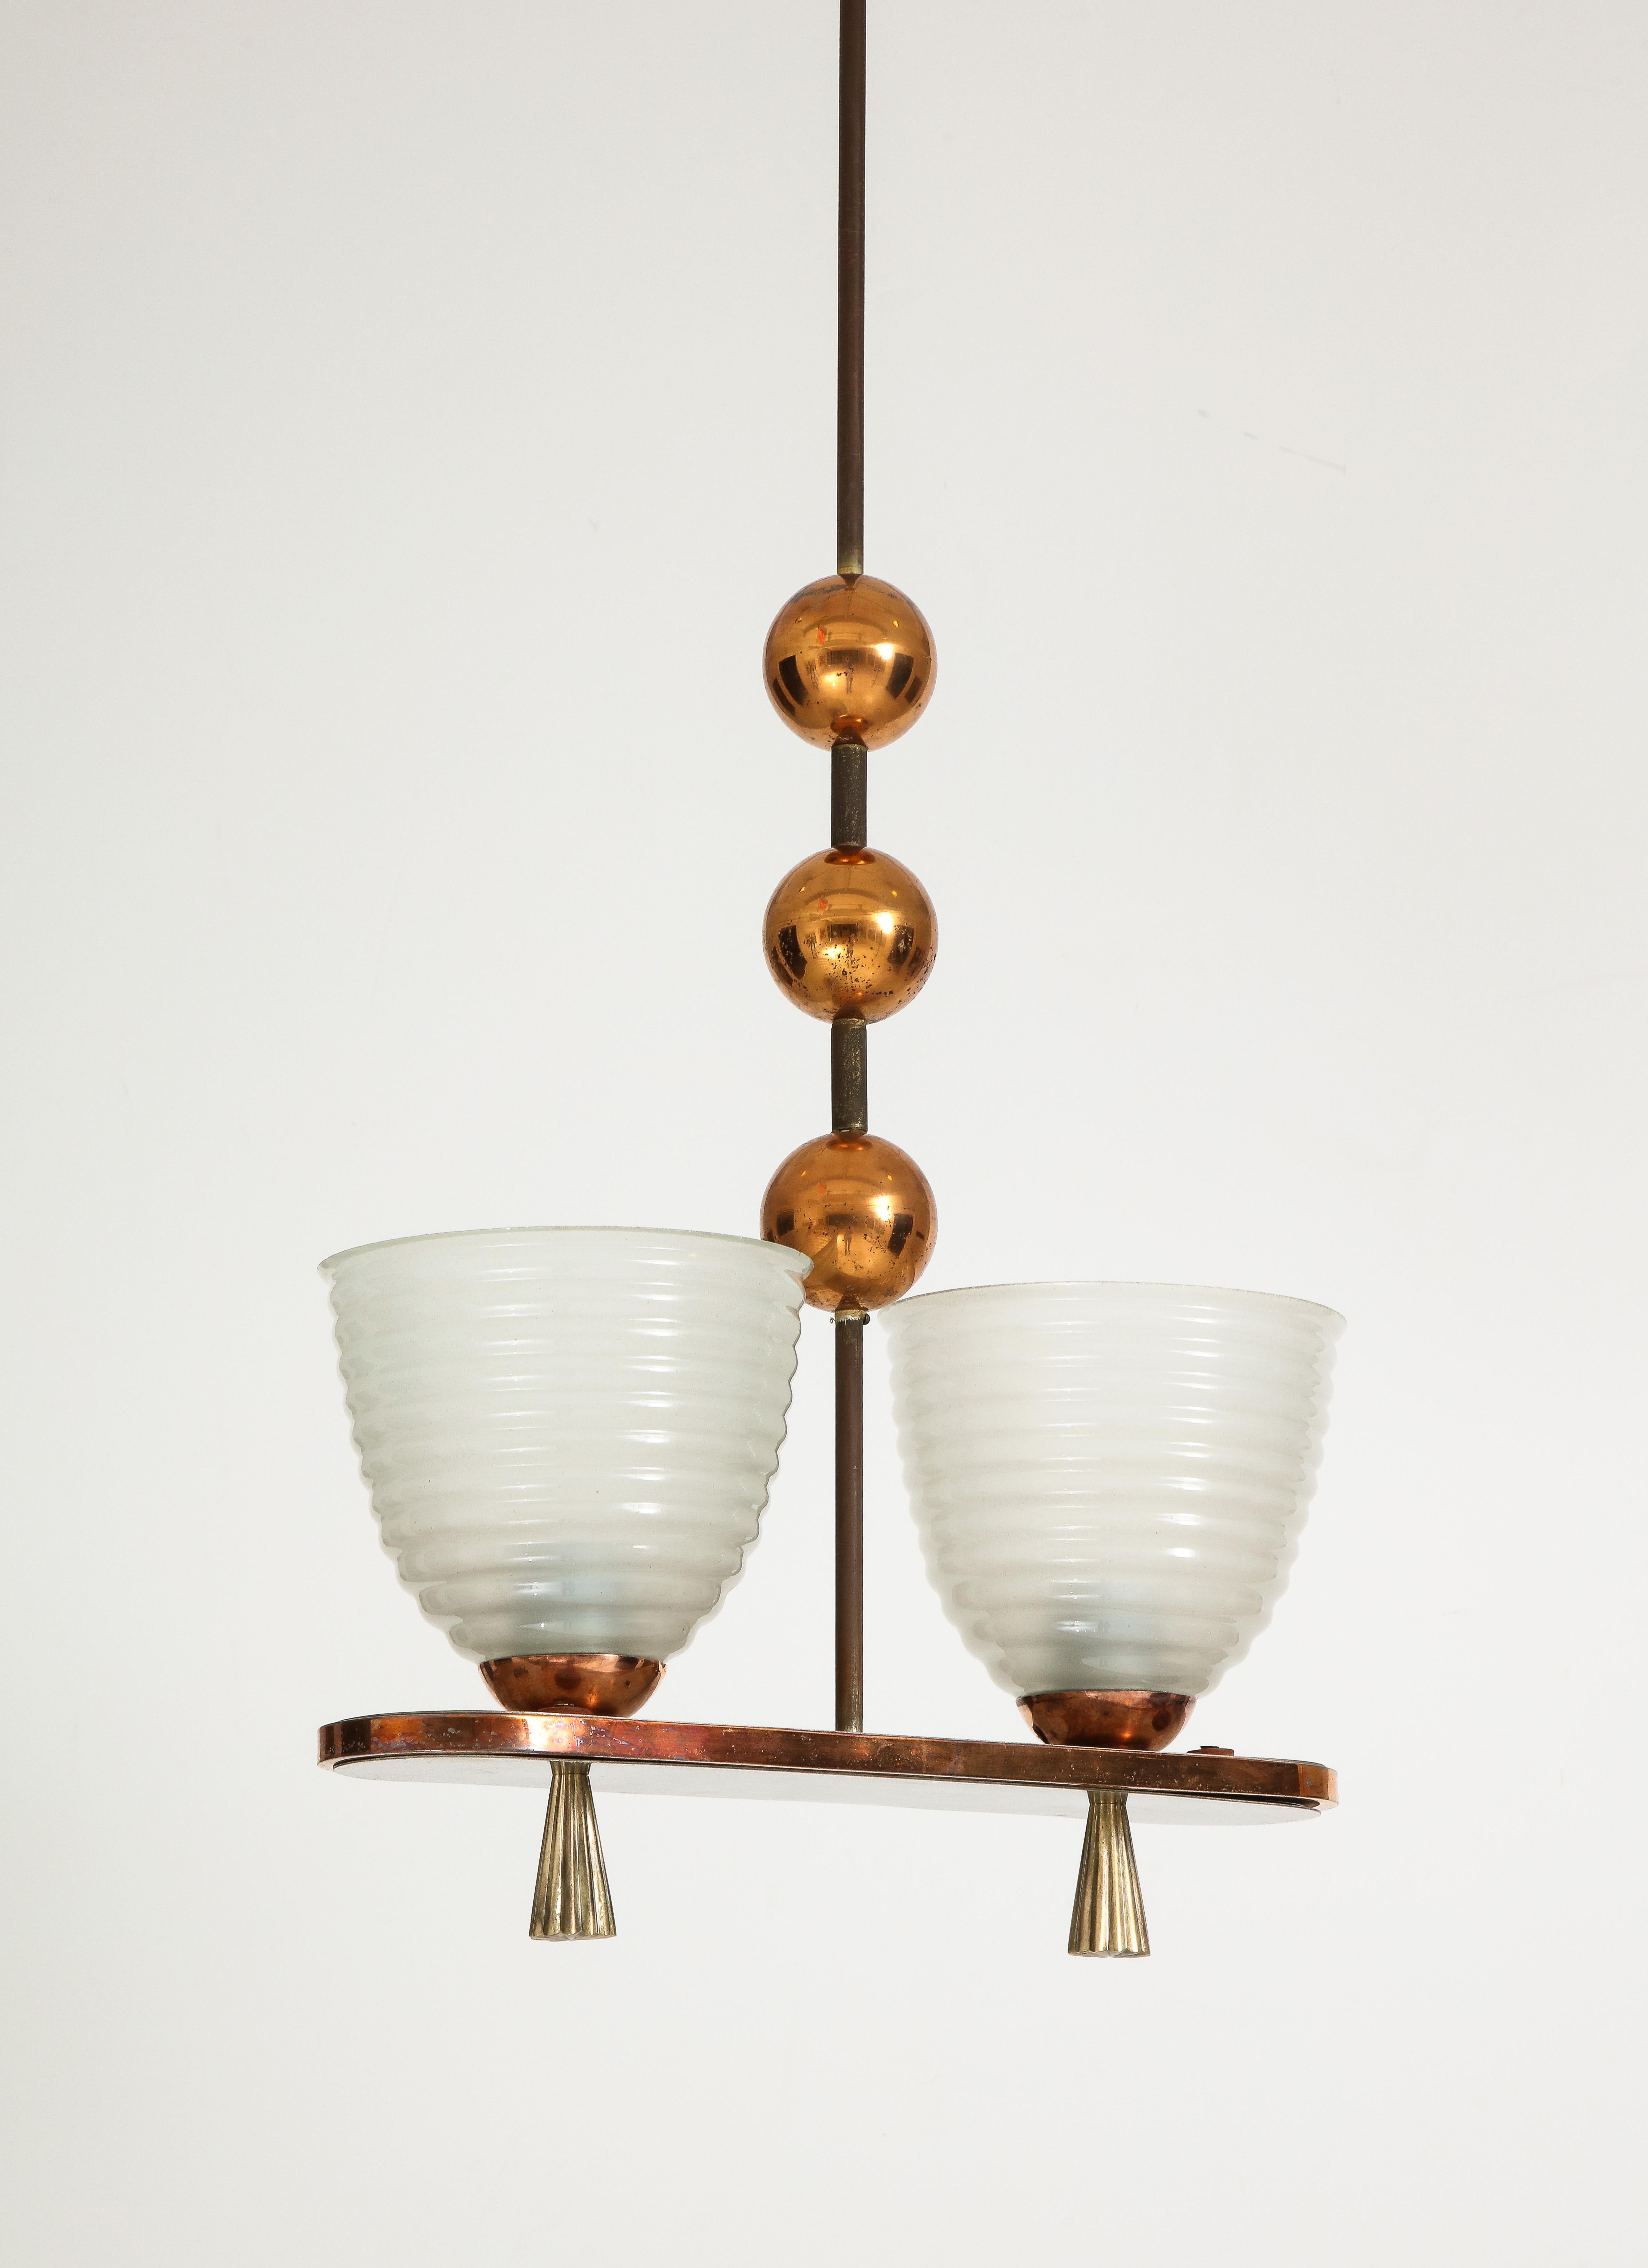 Art Deco 1940's Italian Copper And Brass Chandelier With Glass Shades For Sale